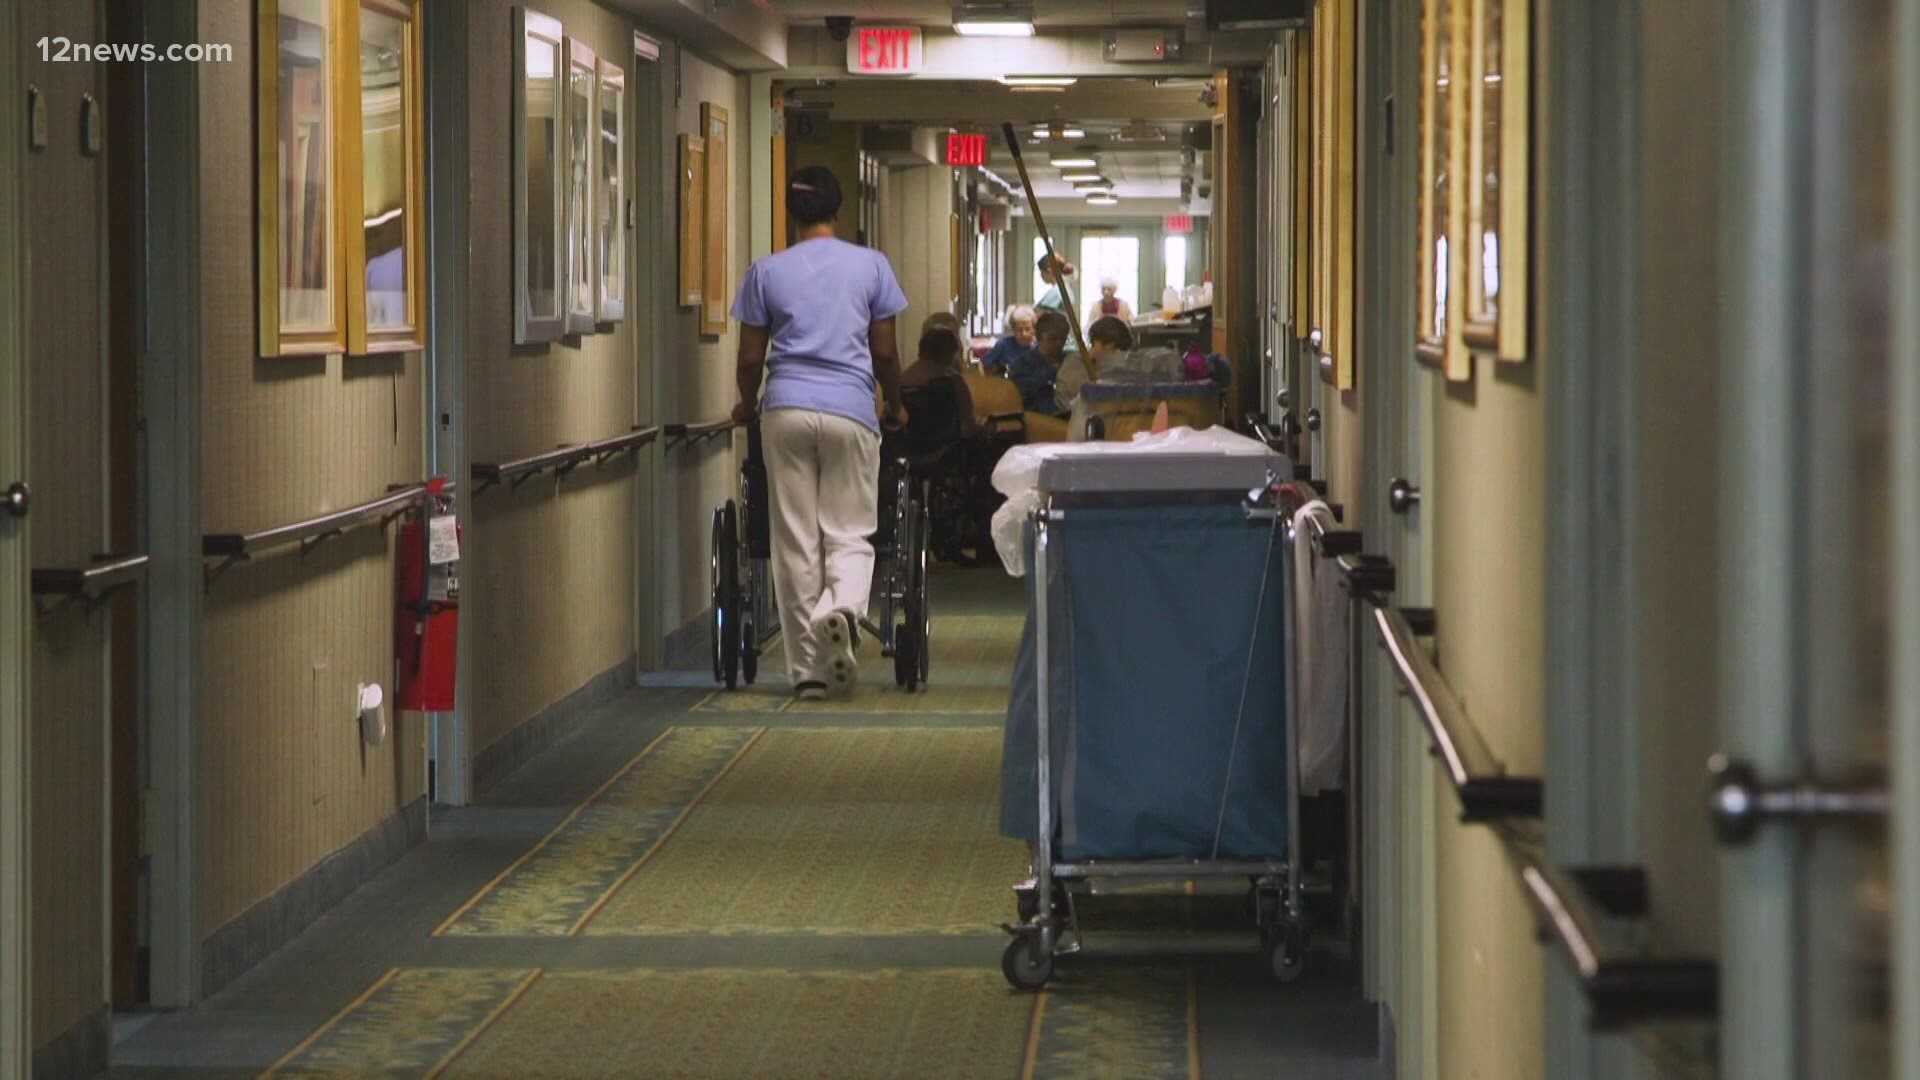 Federal data shows dozens of Arizona nursing homes were cited by the state then received bonus money from the federal government that outweighed the penalties.